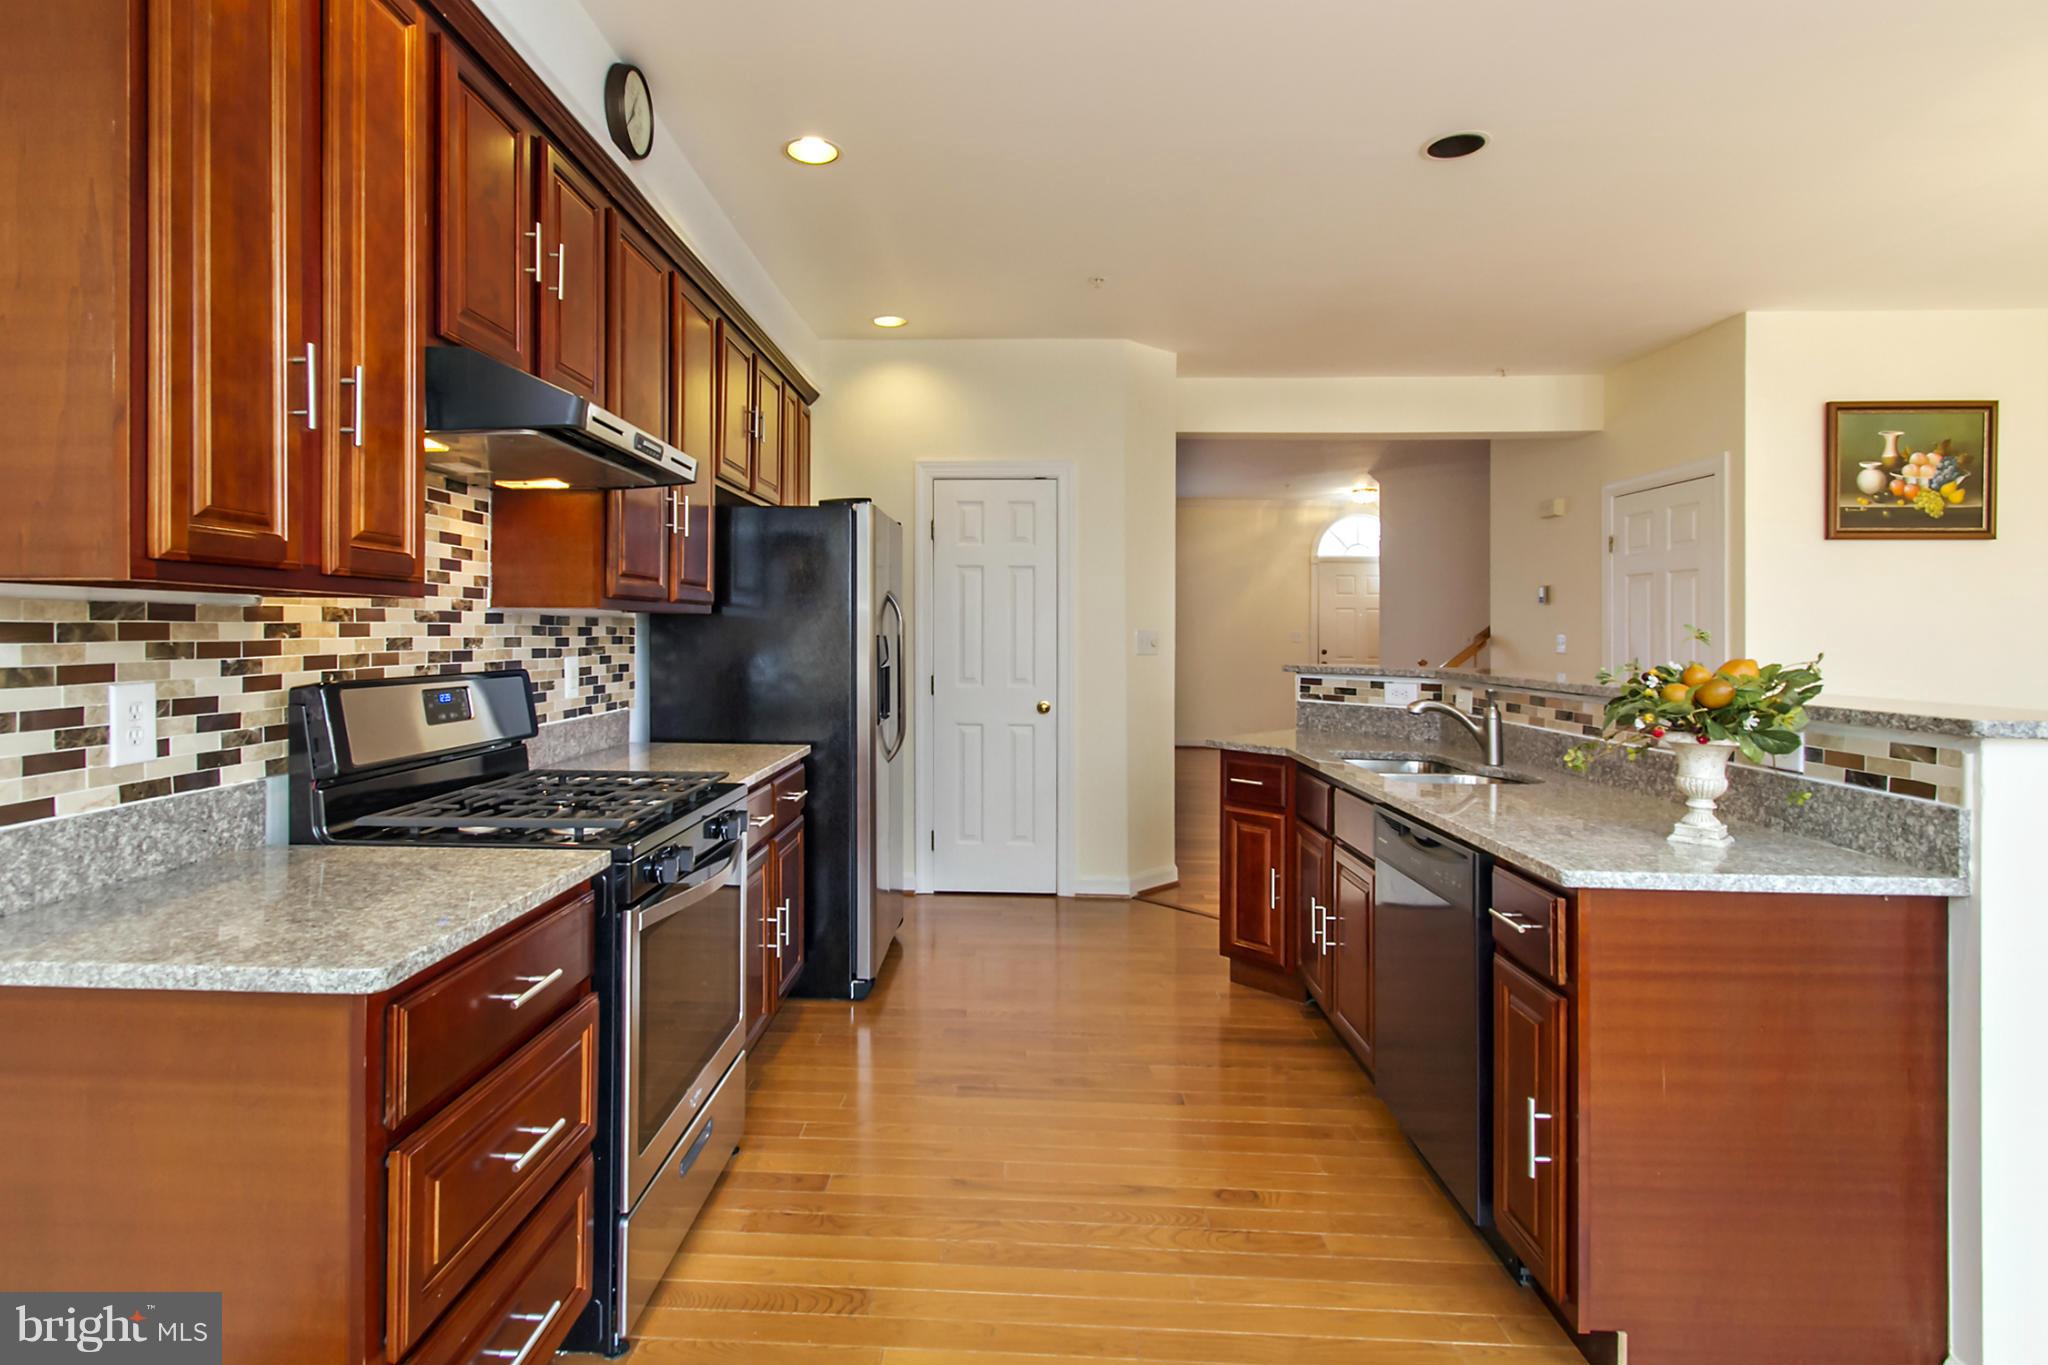 a kitchen with stainless steel appliances granite countertop a stove a sink dishwasher and a refrigerator